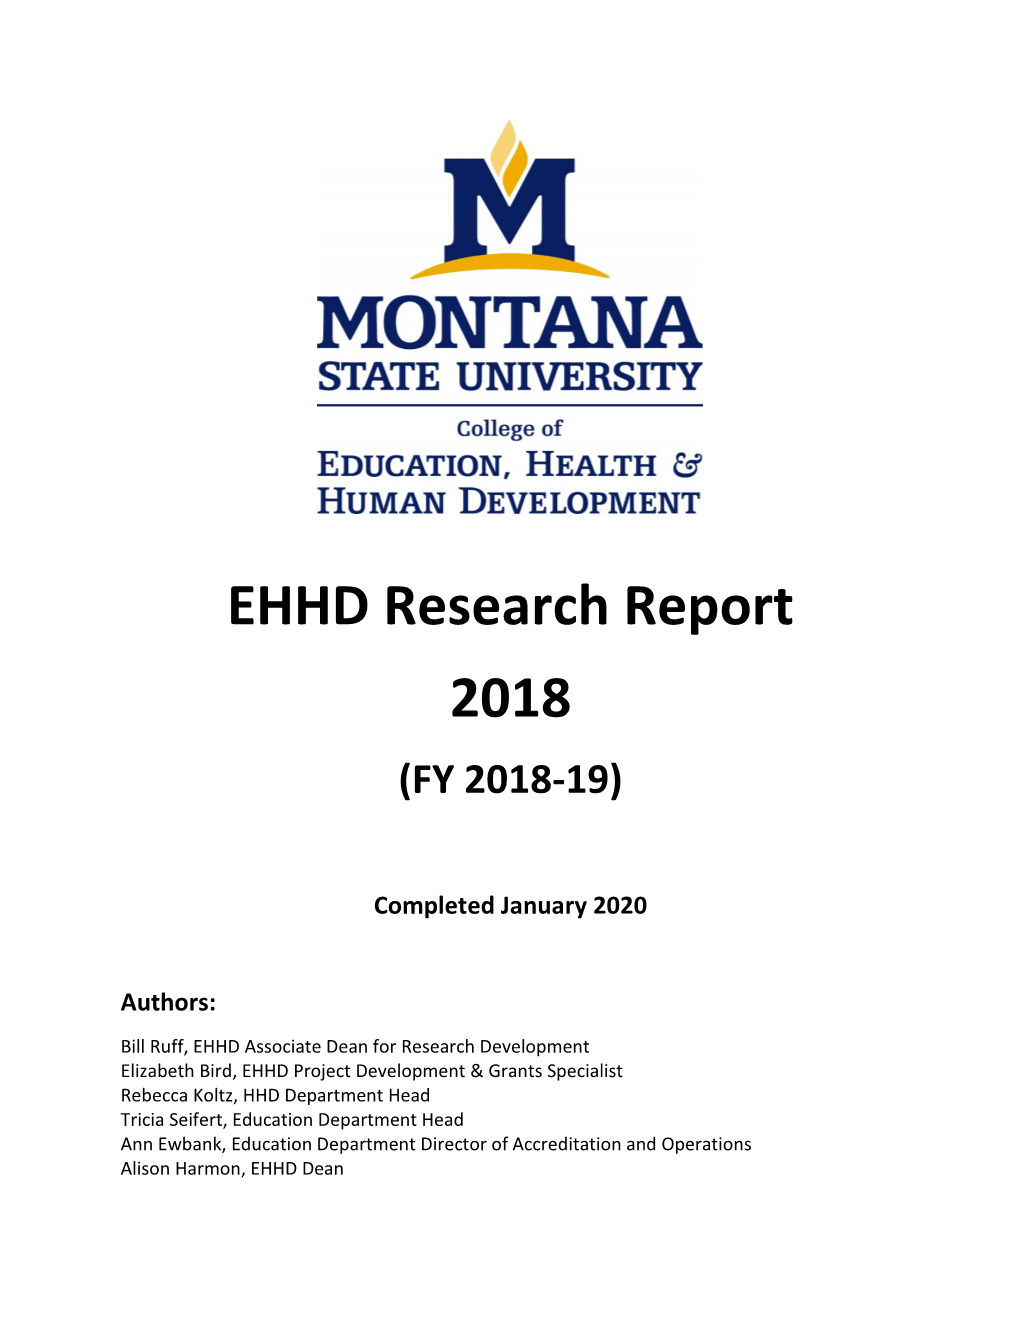 EHHD Research Report 2018 (FY 2018-19)